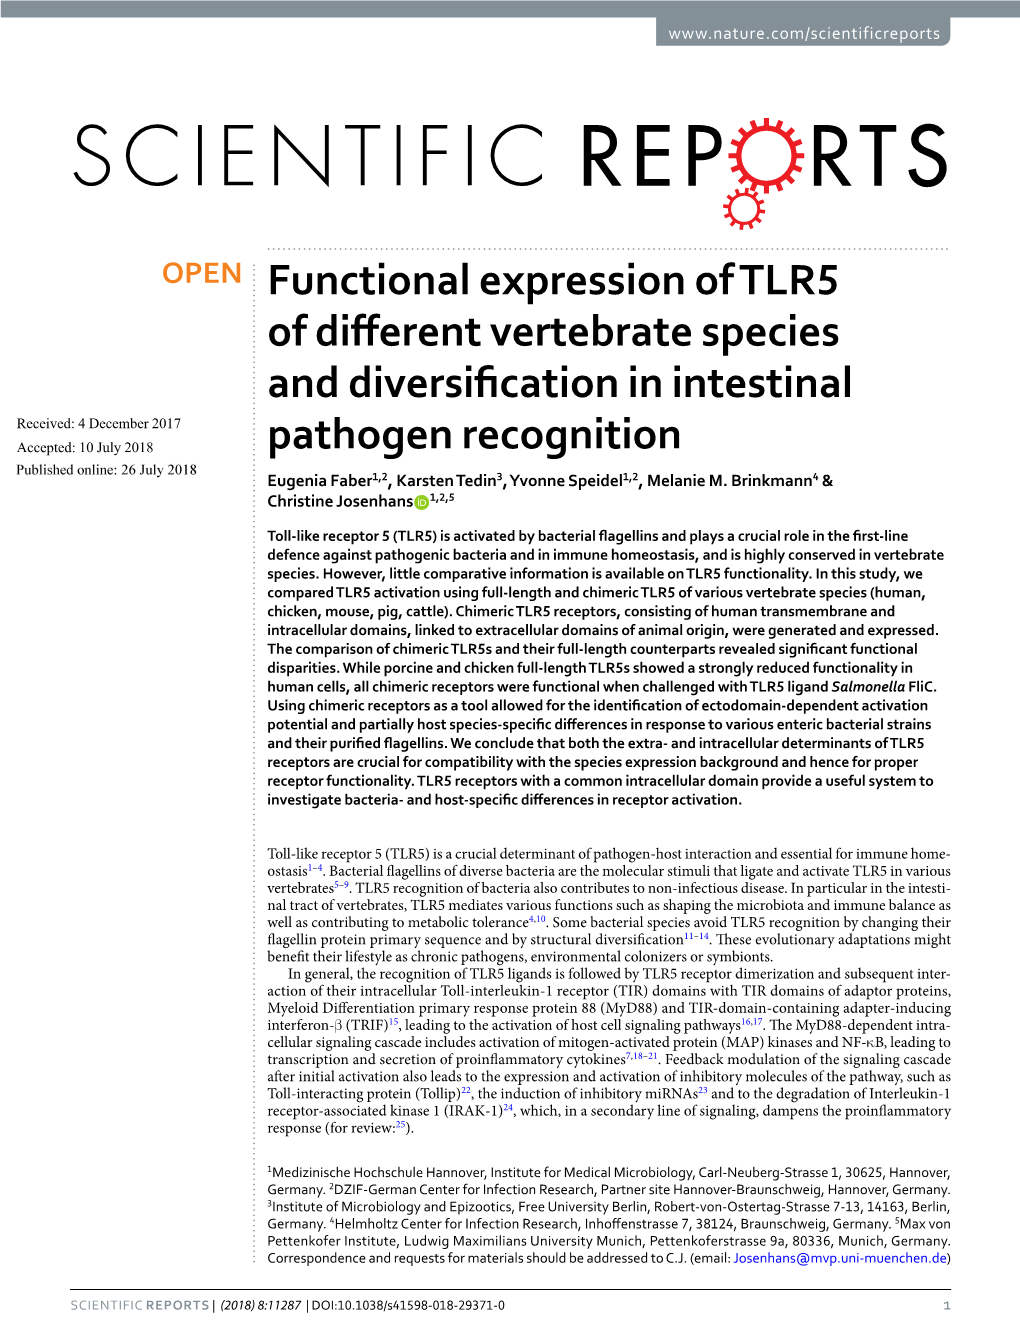 Functional Expression of TLR5 of Different Vertebrate Species And